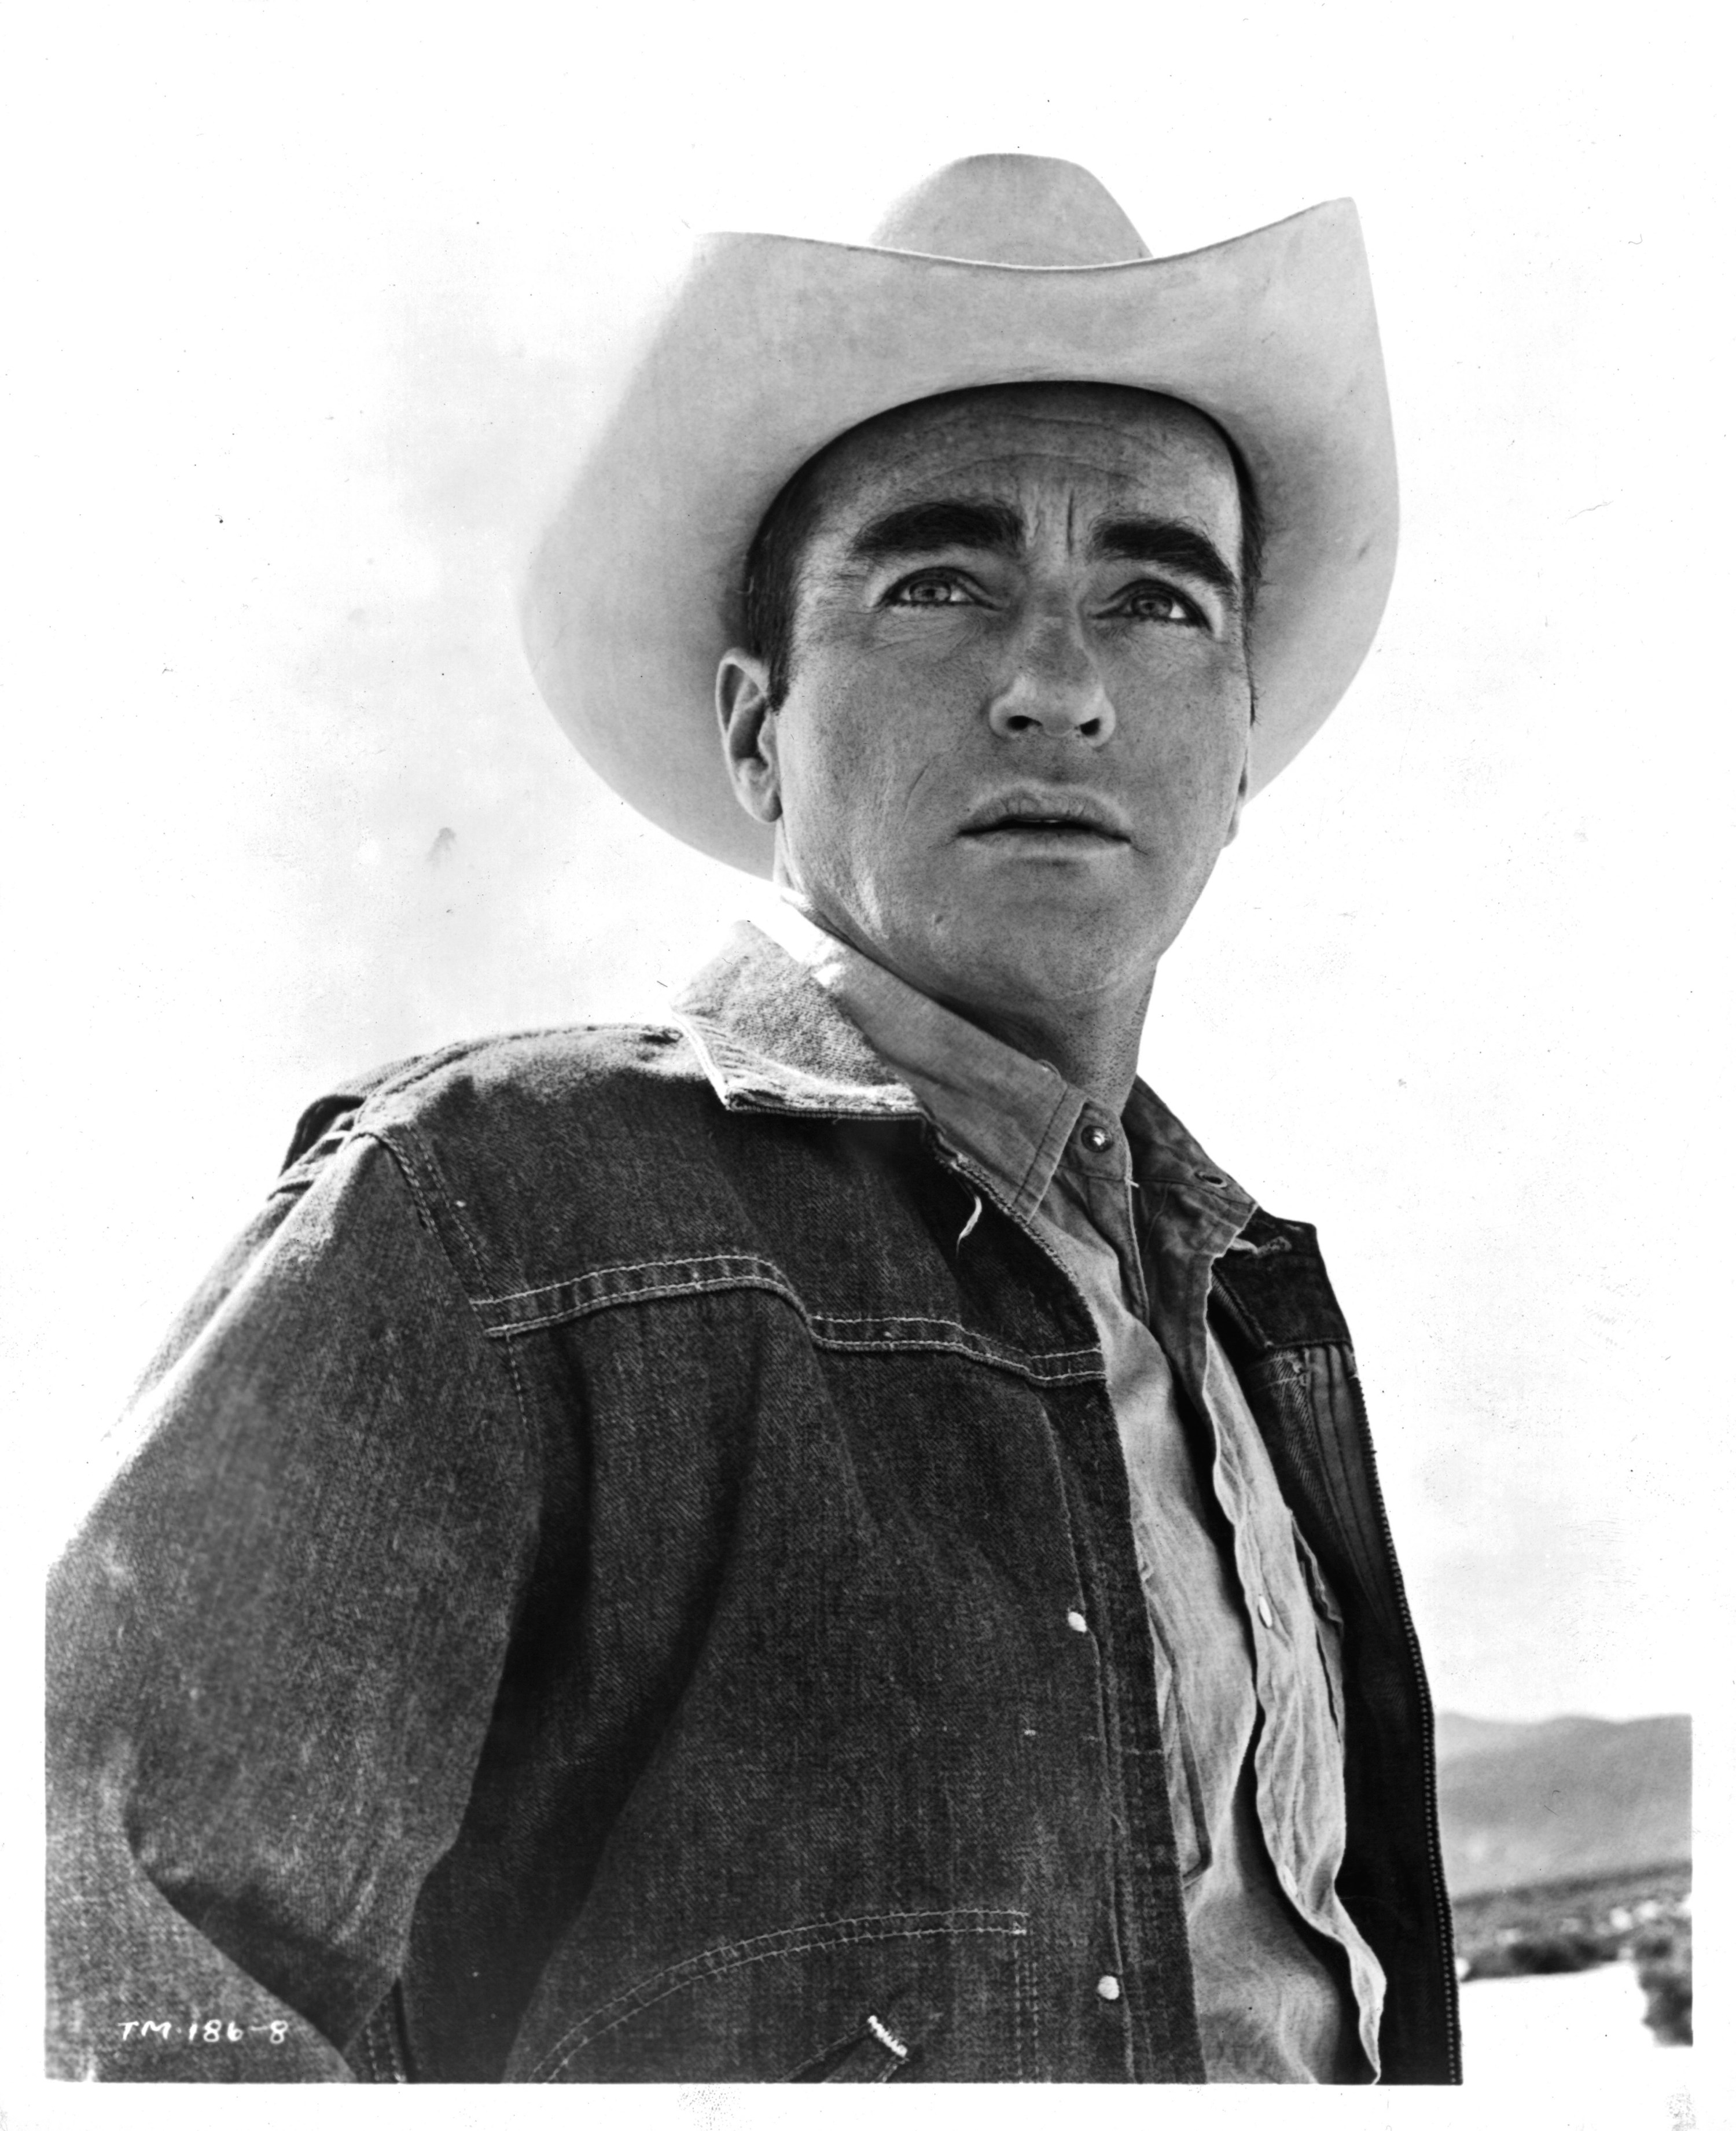 Montgomery Clift in a scene from the film &#x27;The Misfits&#x27;, 1961